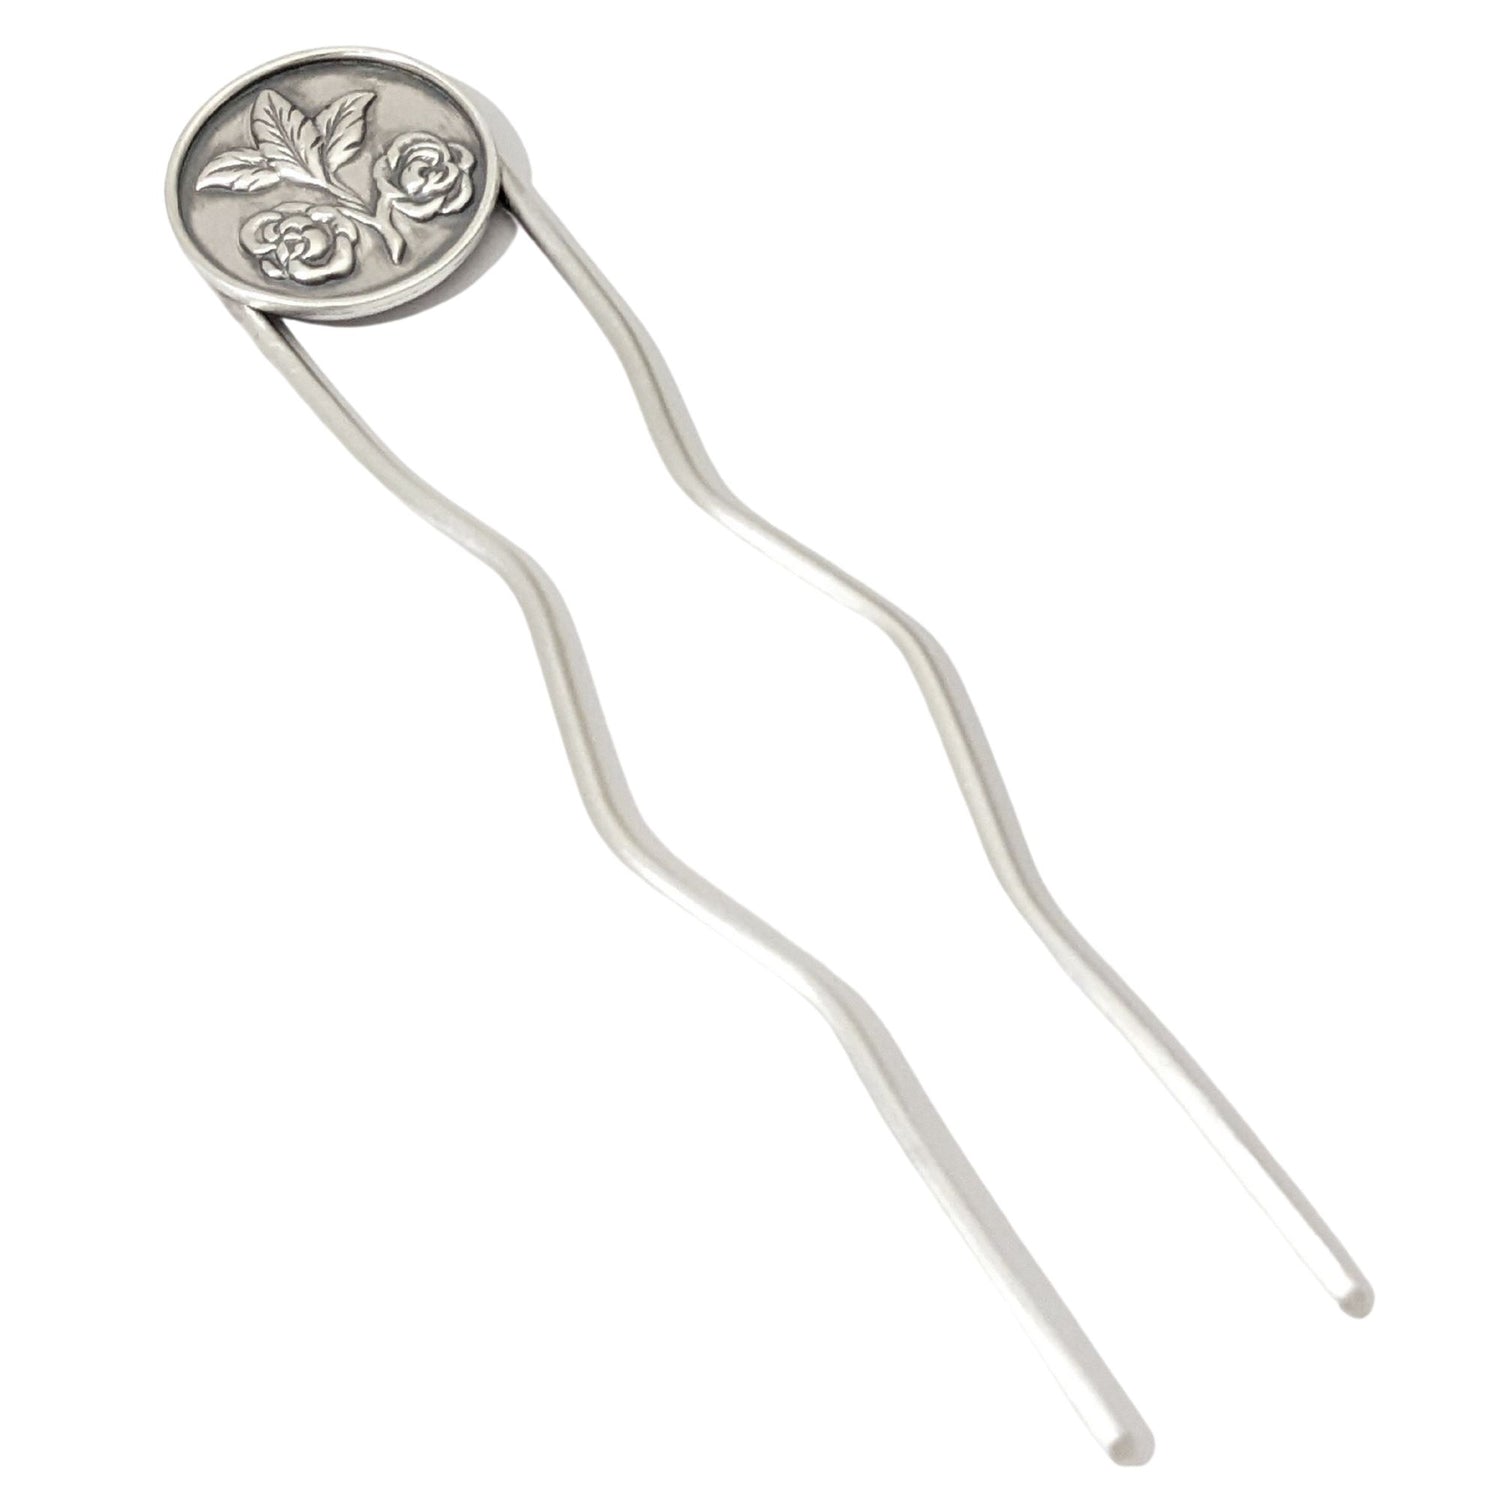 Sterling silver hair fork. Attached to top of fork is a round piece of silver with a rounded border edge. The sheet has a raised design of two roses growing off of a branch clipping and at the end of the branch there are three leaves.